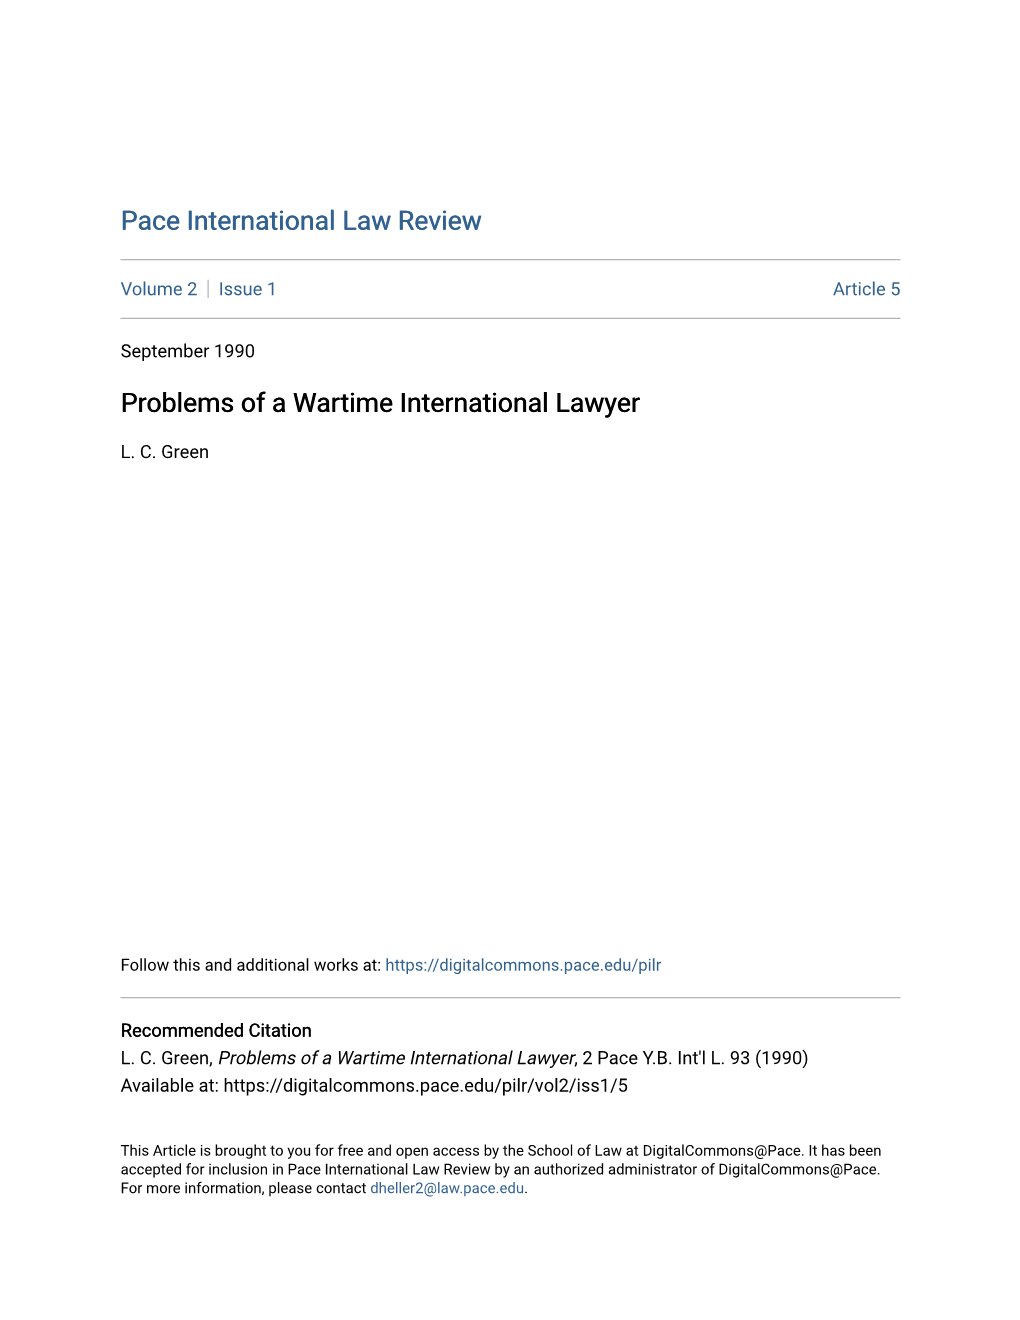 Problems of a Wartime International Lawyer